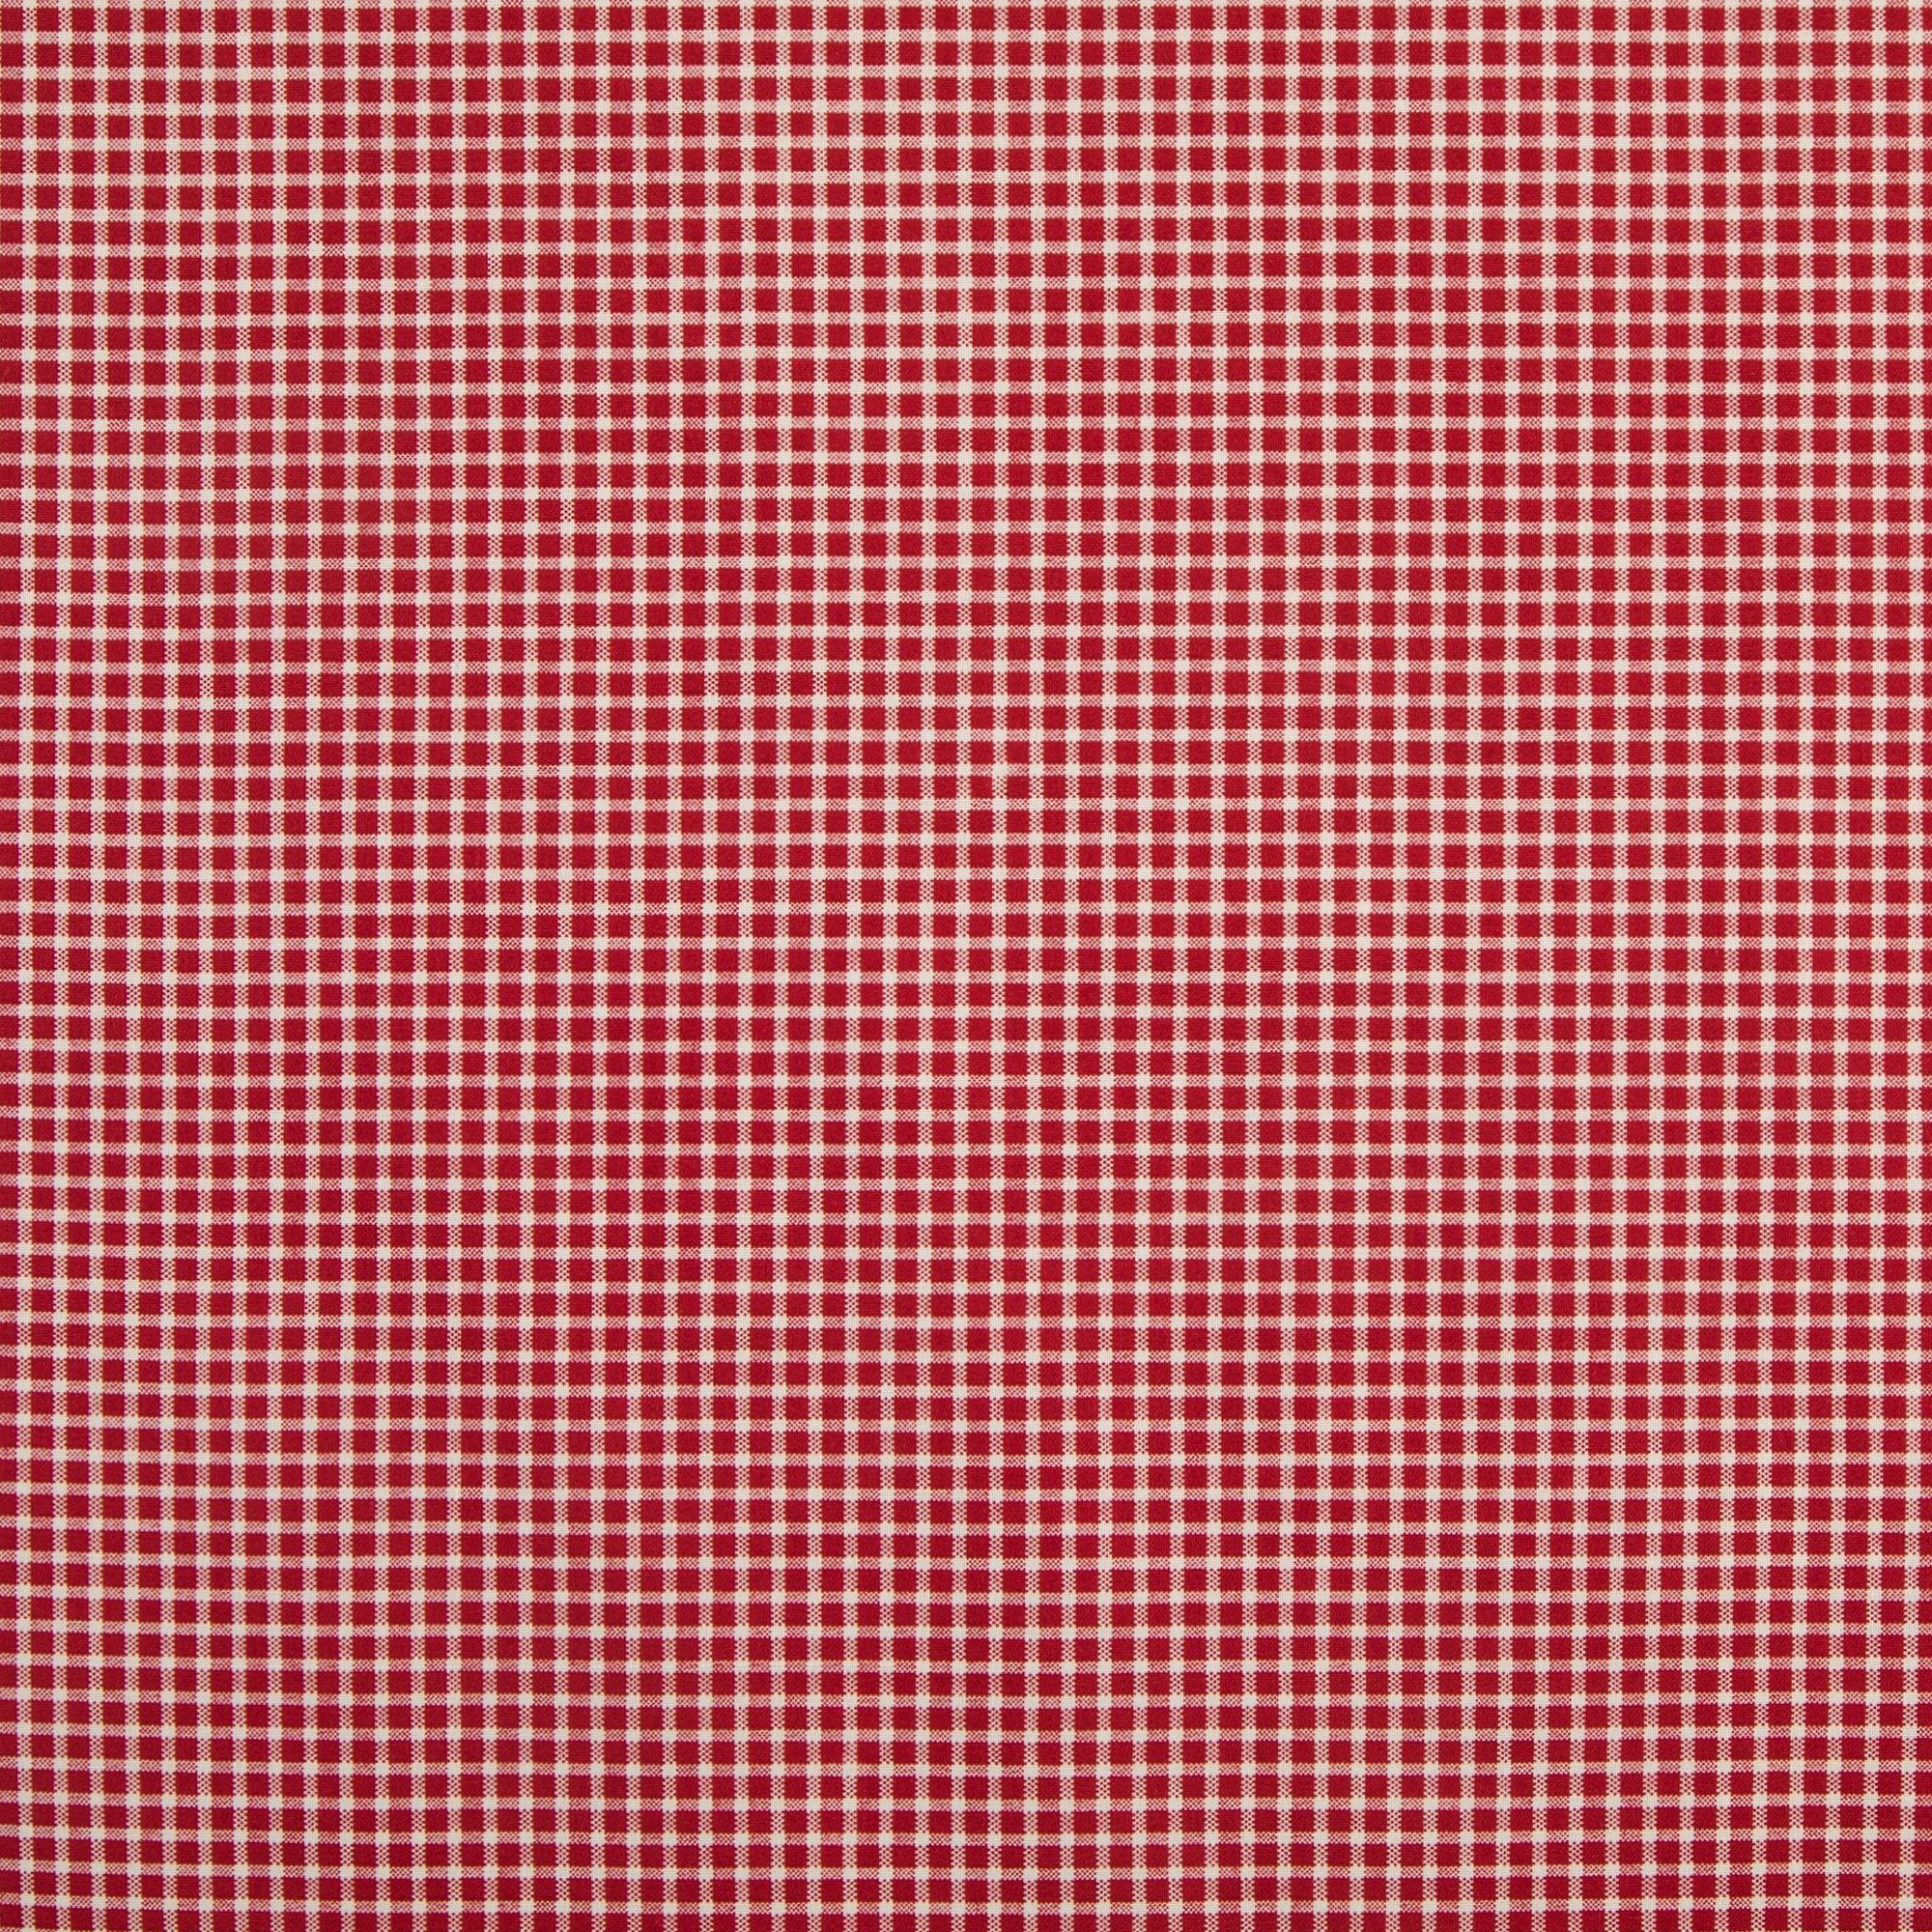 Pink Gingham Cotton Calico Fabric, Hobby Lobby